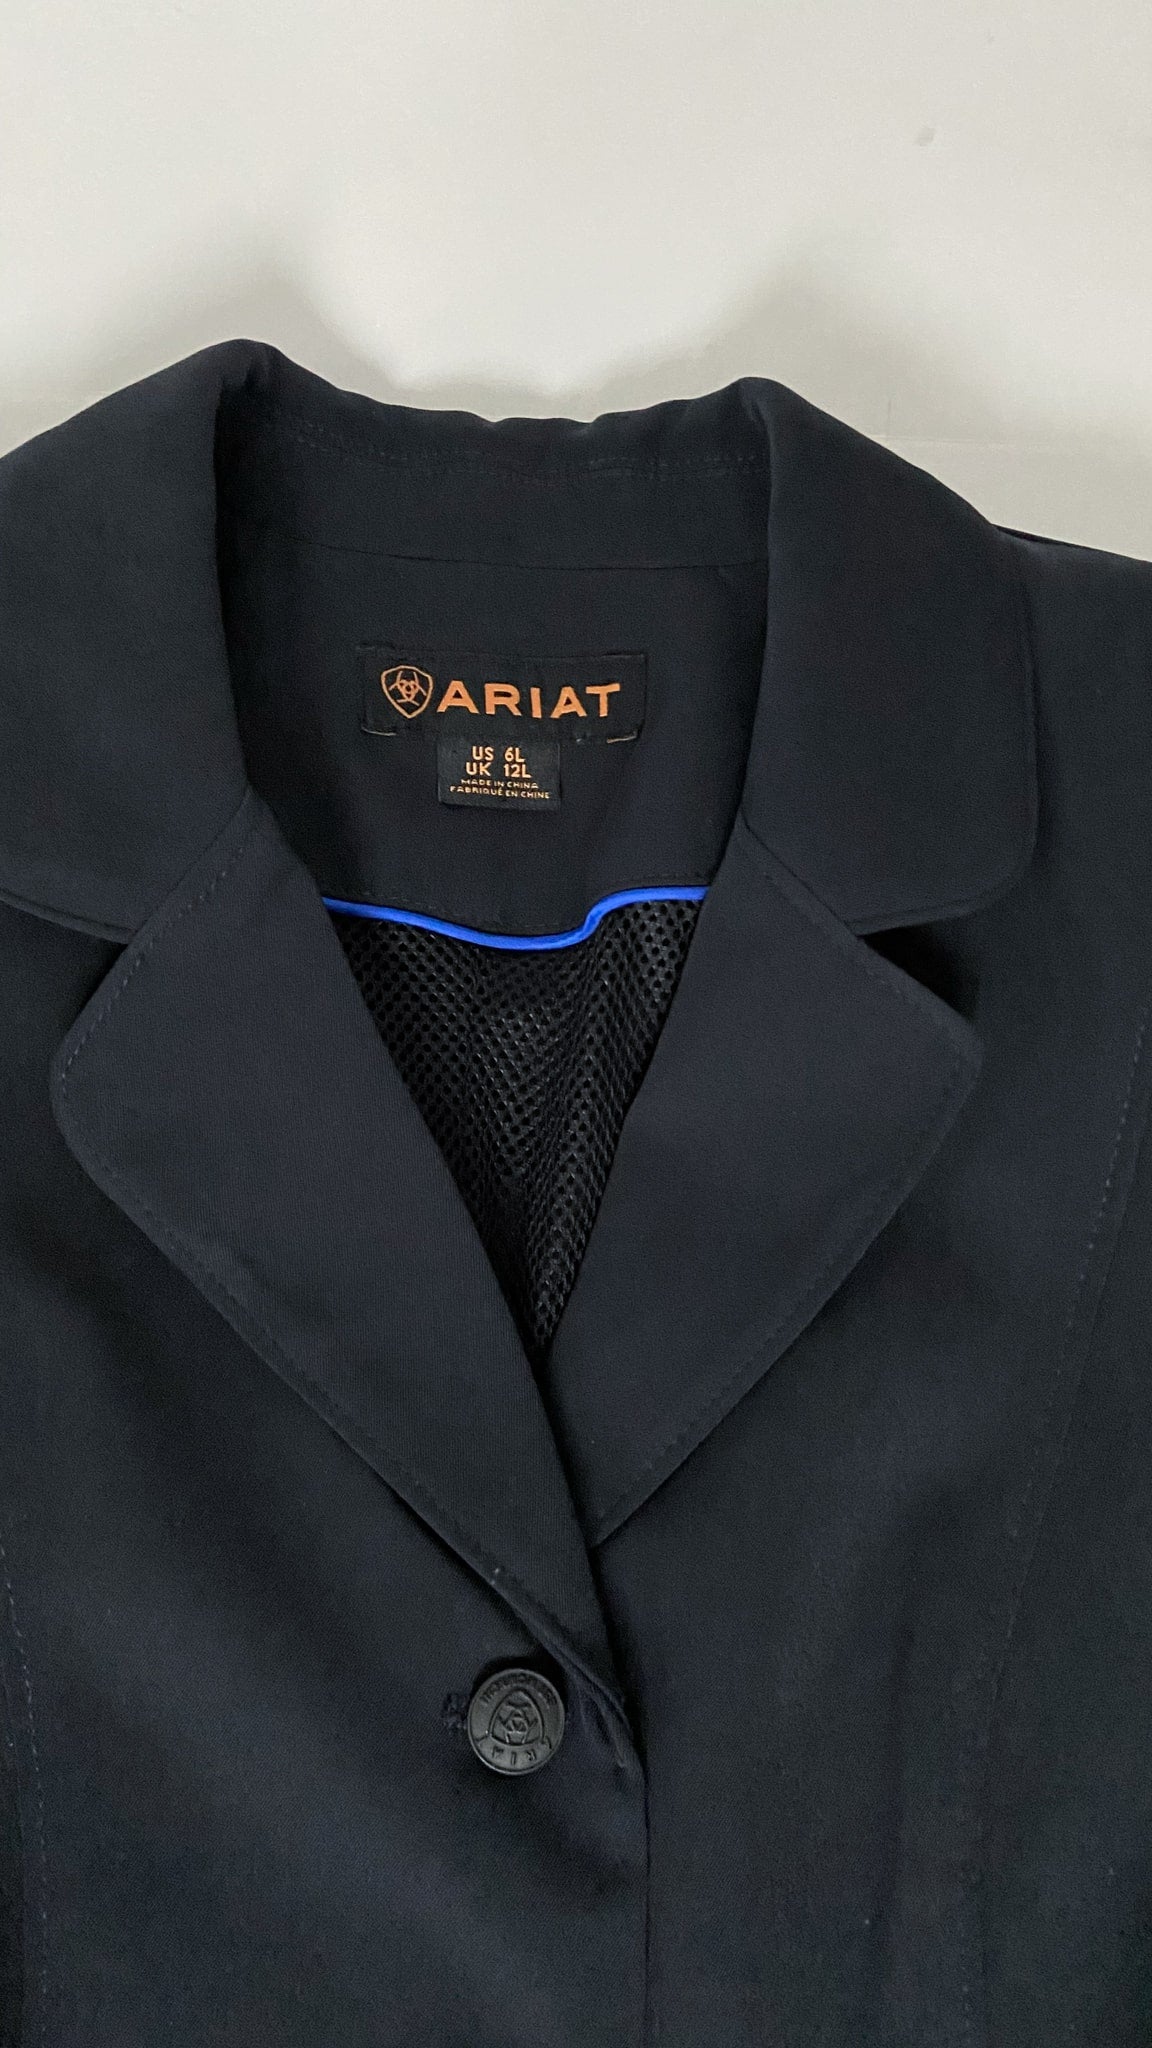 Ariat Soft Shell Competition Jacket - Navy - Women's 6L